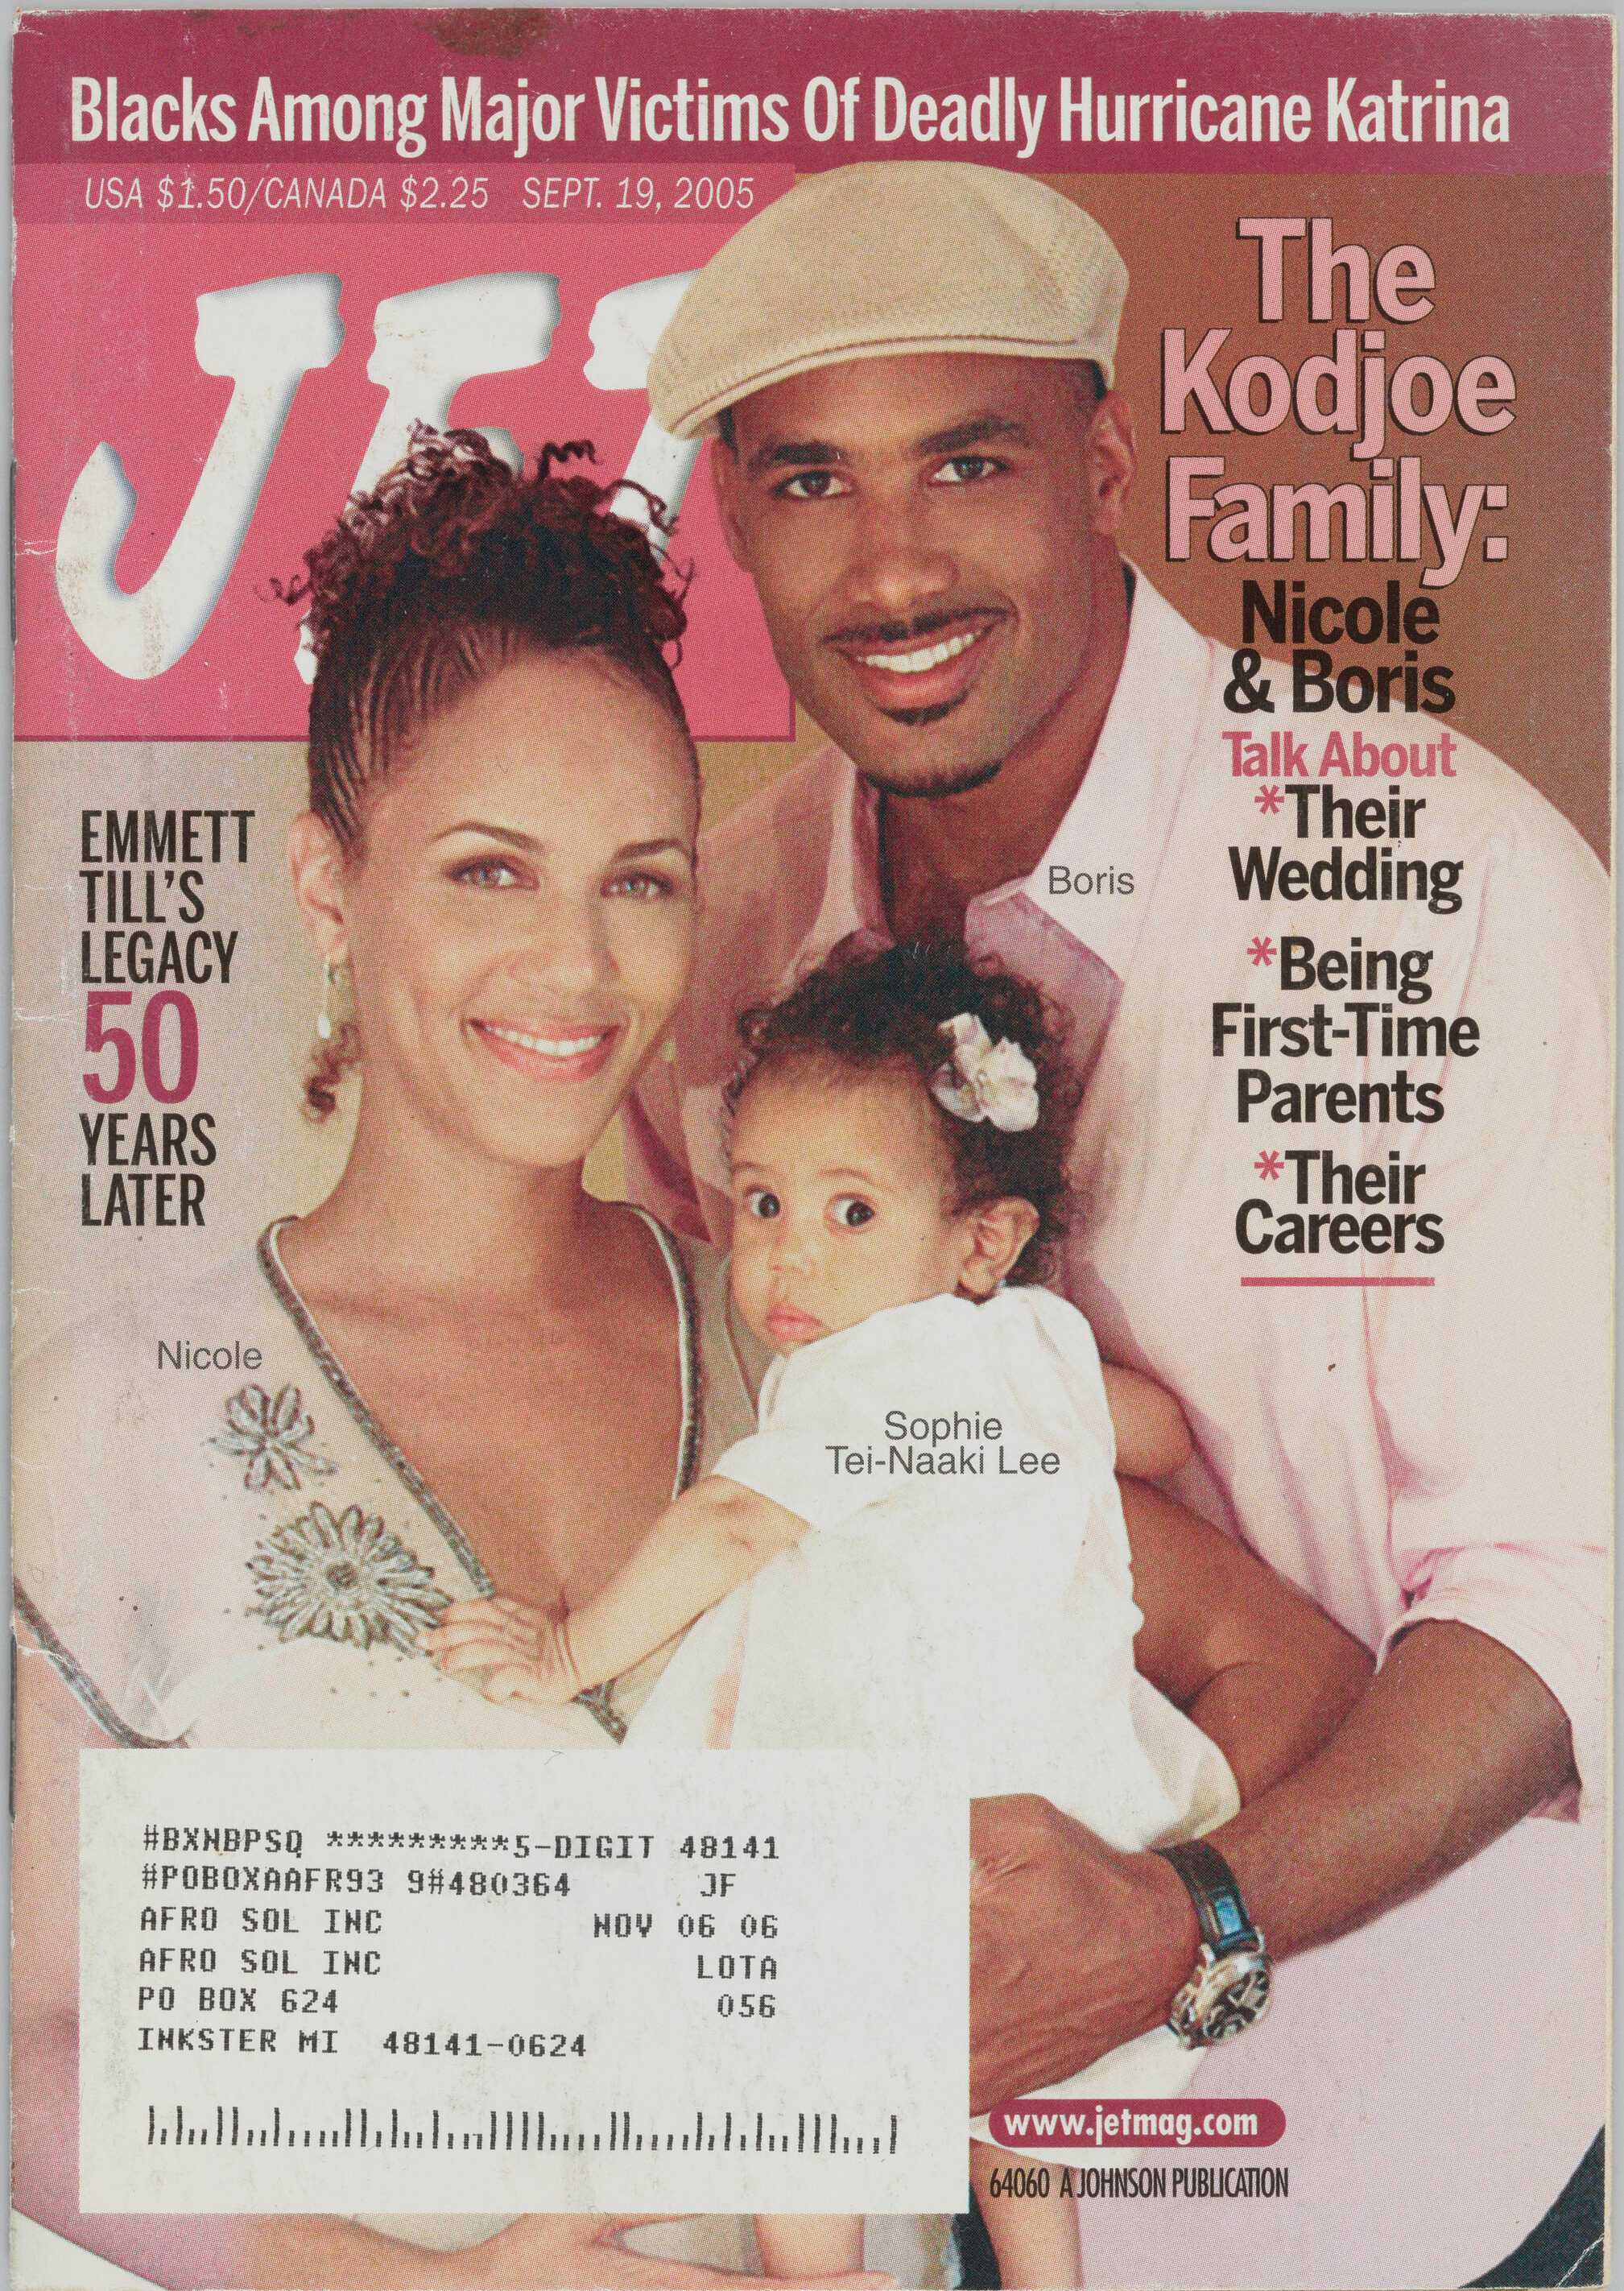 Cover features a photo of Boris and Nicole Kodjoe with black and pink print. Pages 20-25, an article on Emmett Till.